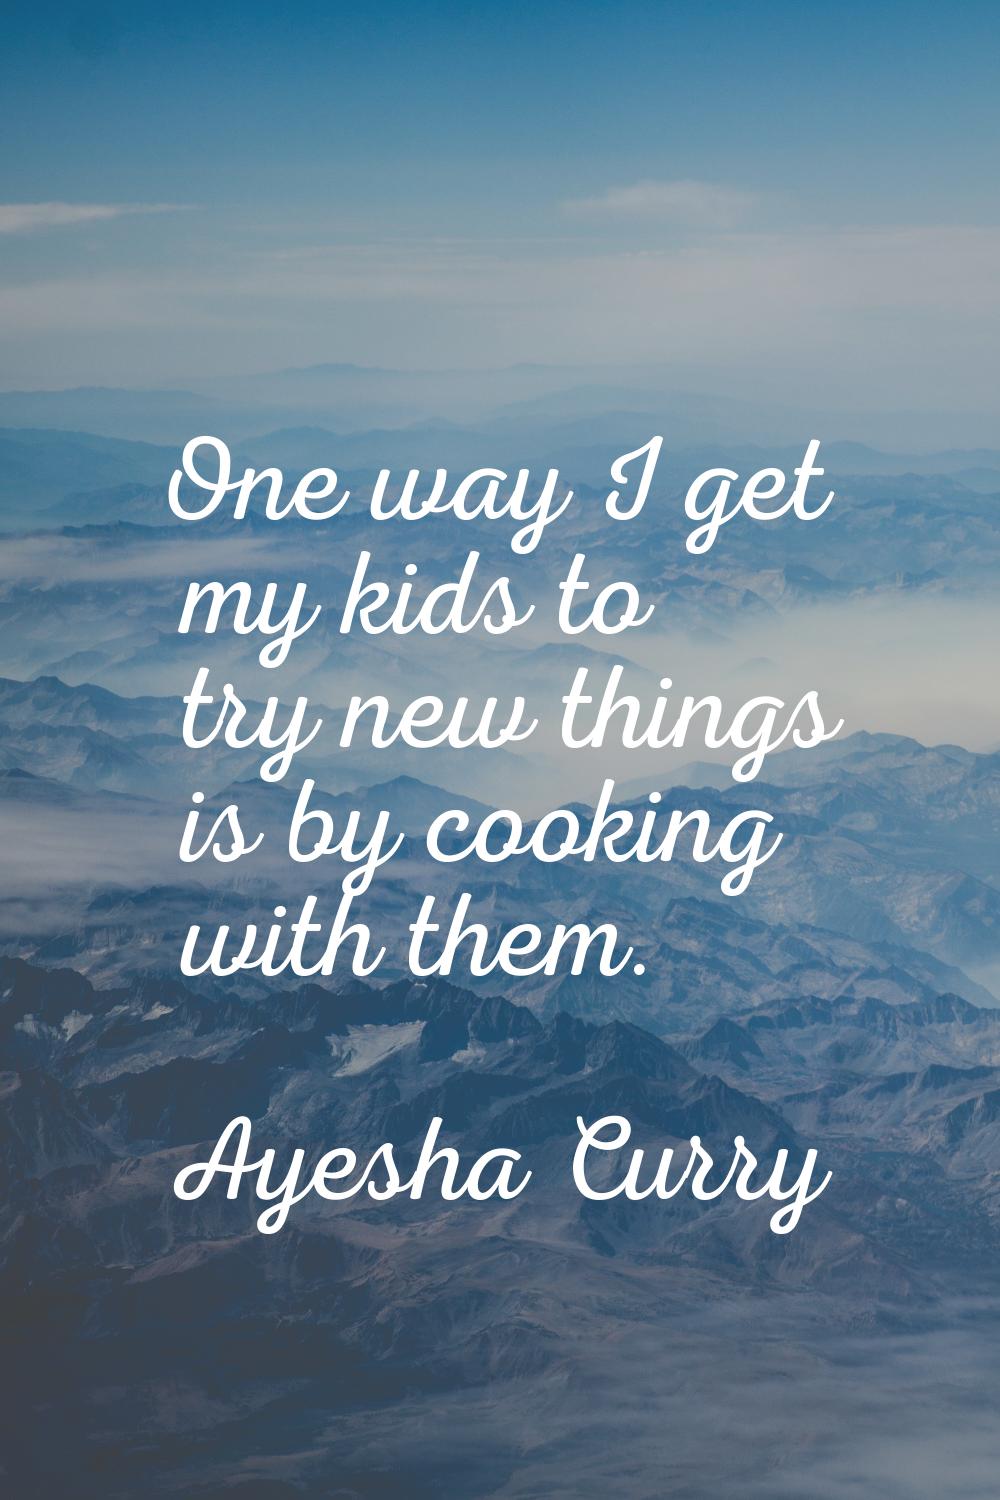 One way I get my kids to try new things is by cooking with them.